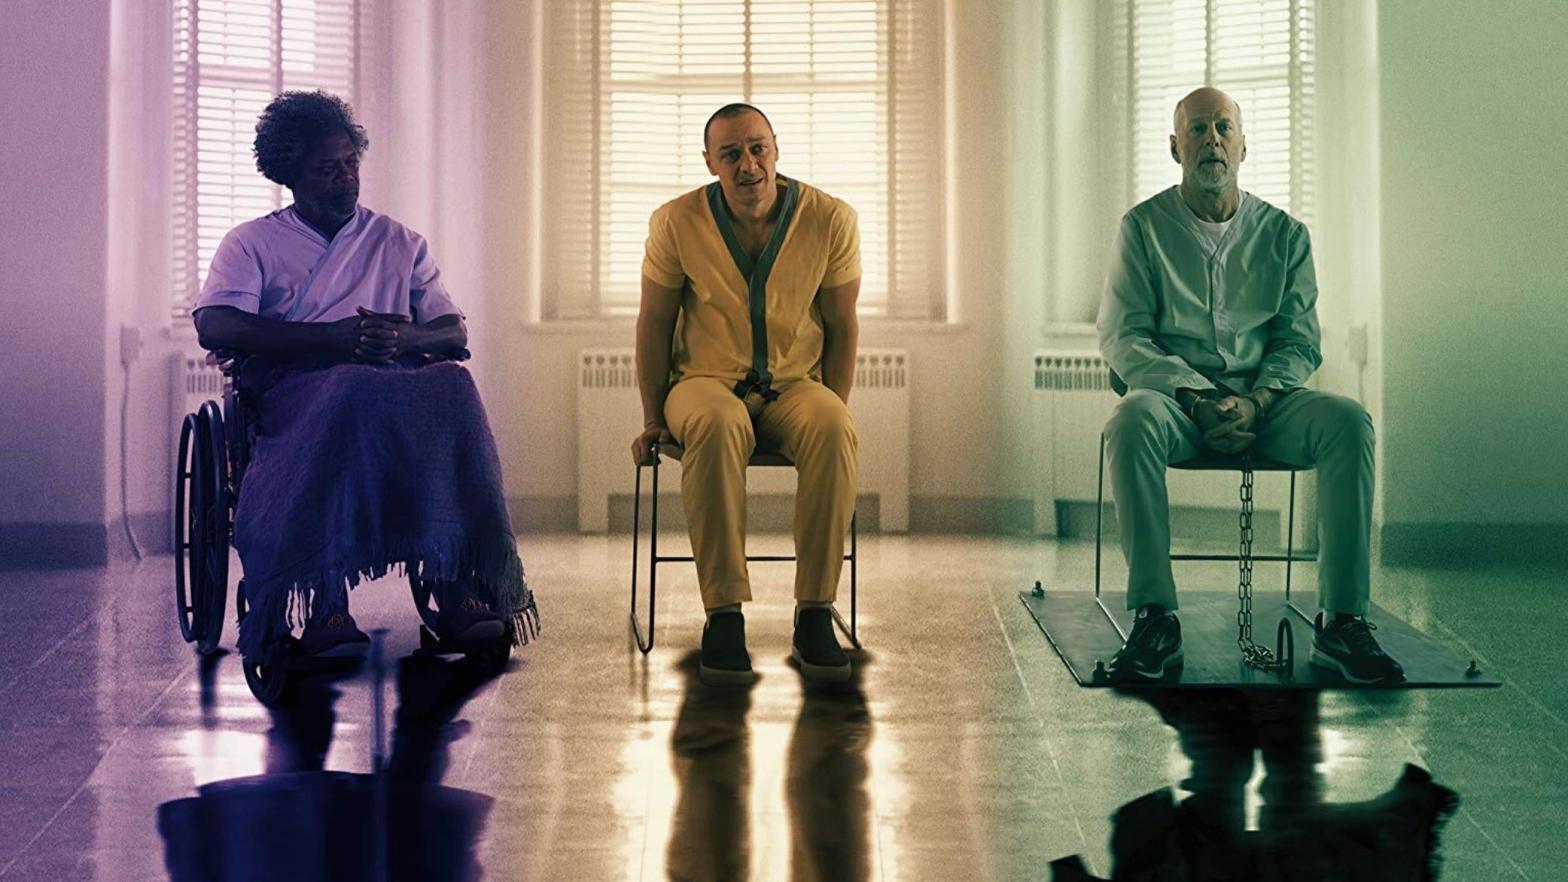 Glass could have crossed over with a fourth M. Night Shyamalan film. (Image: Universal)